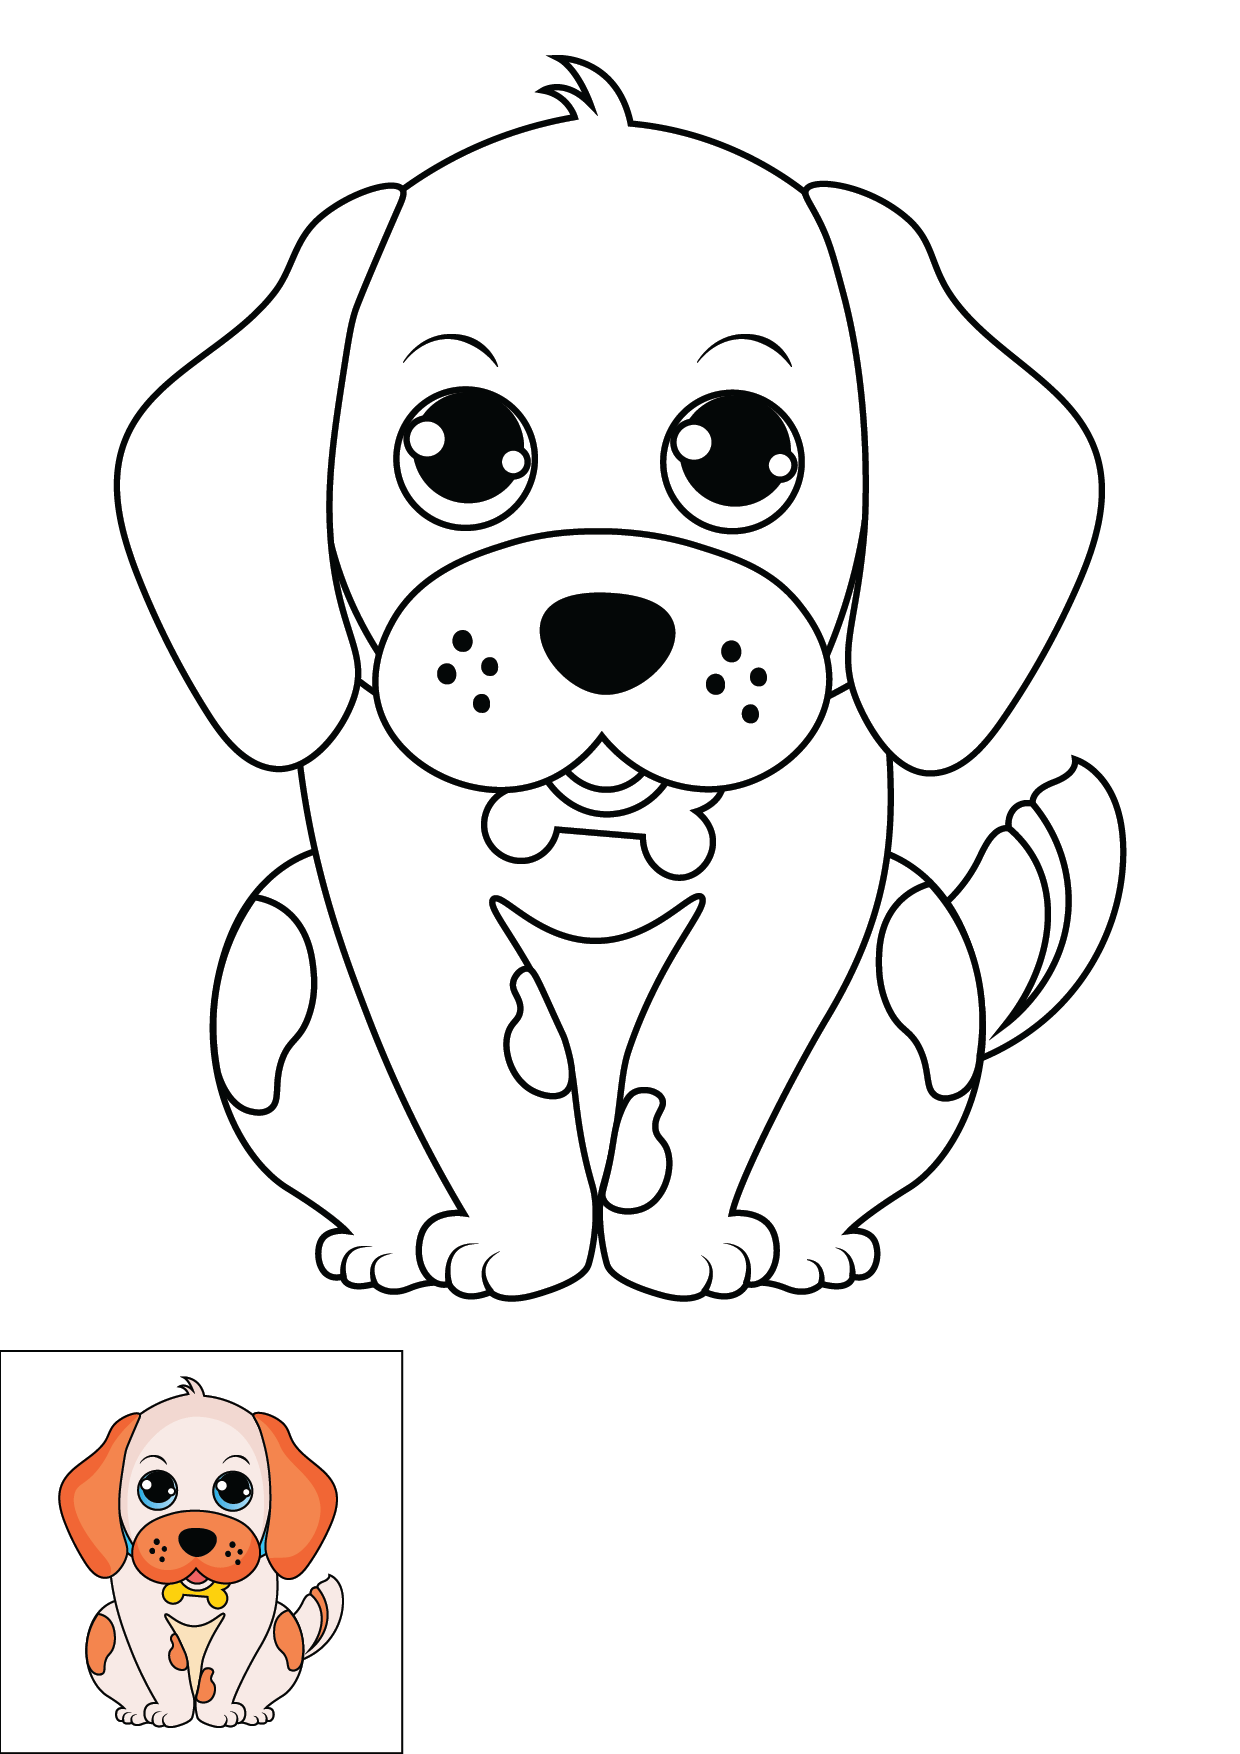 How to Draw A Puppy Light Colored Step by Step Printable Color